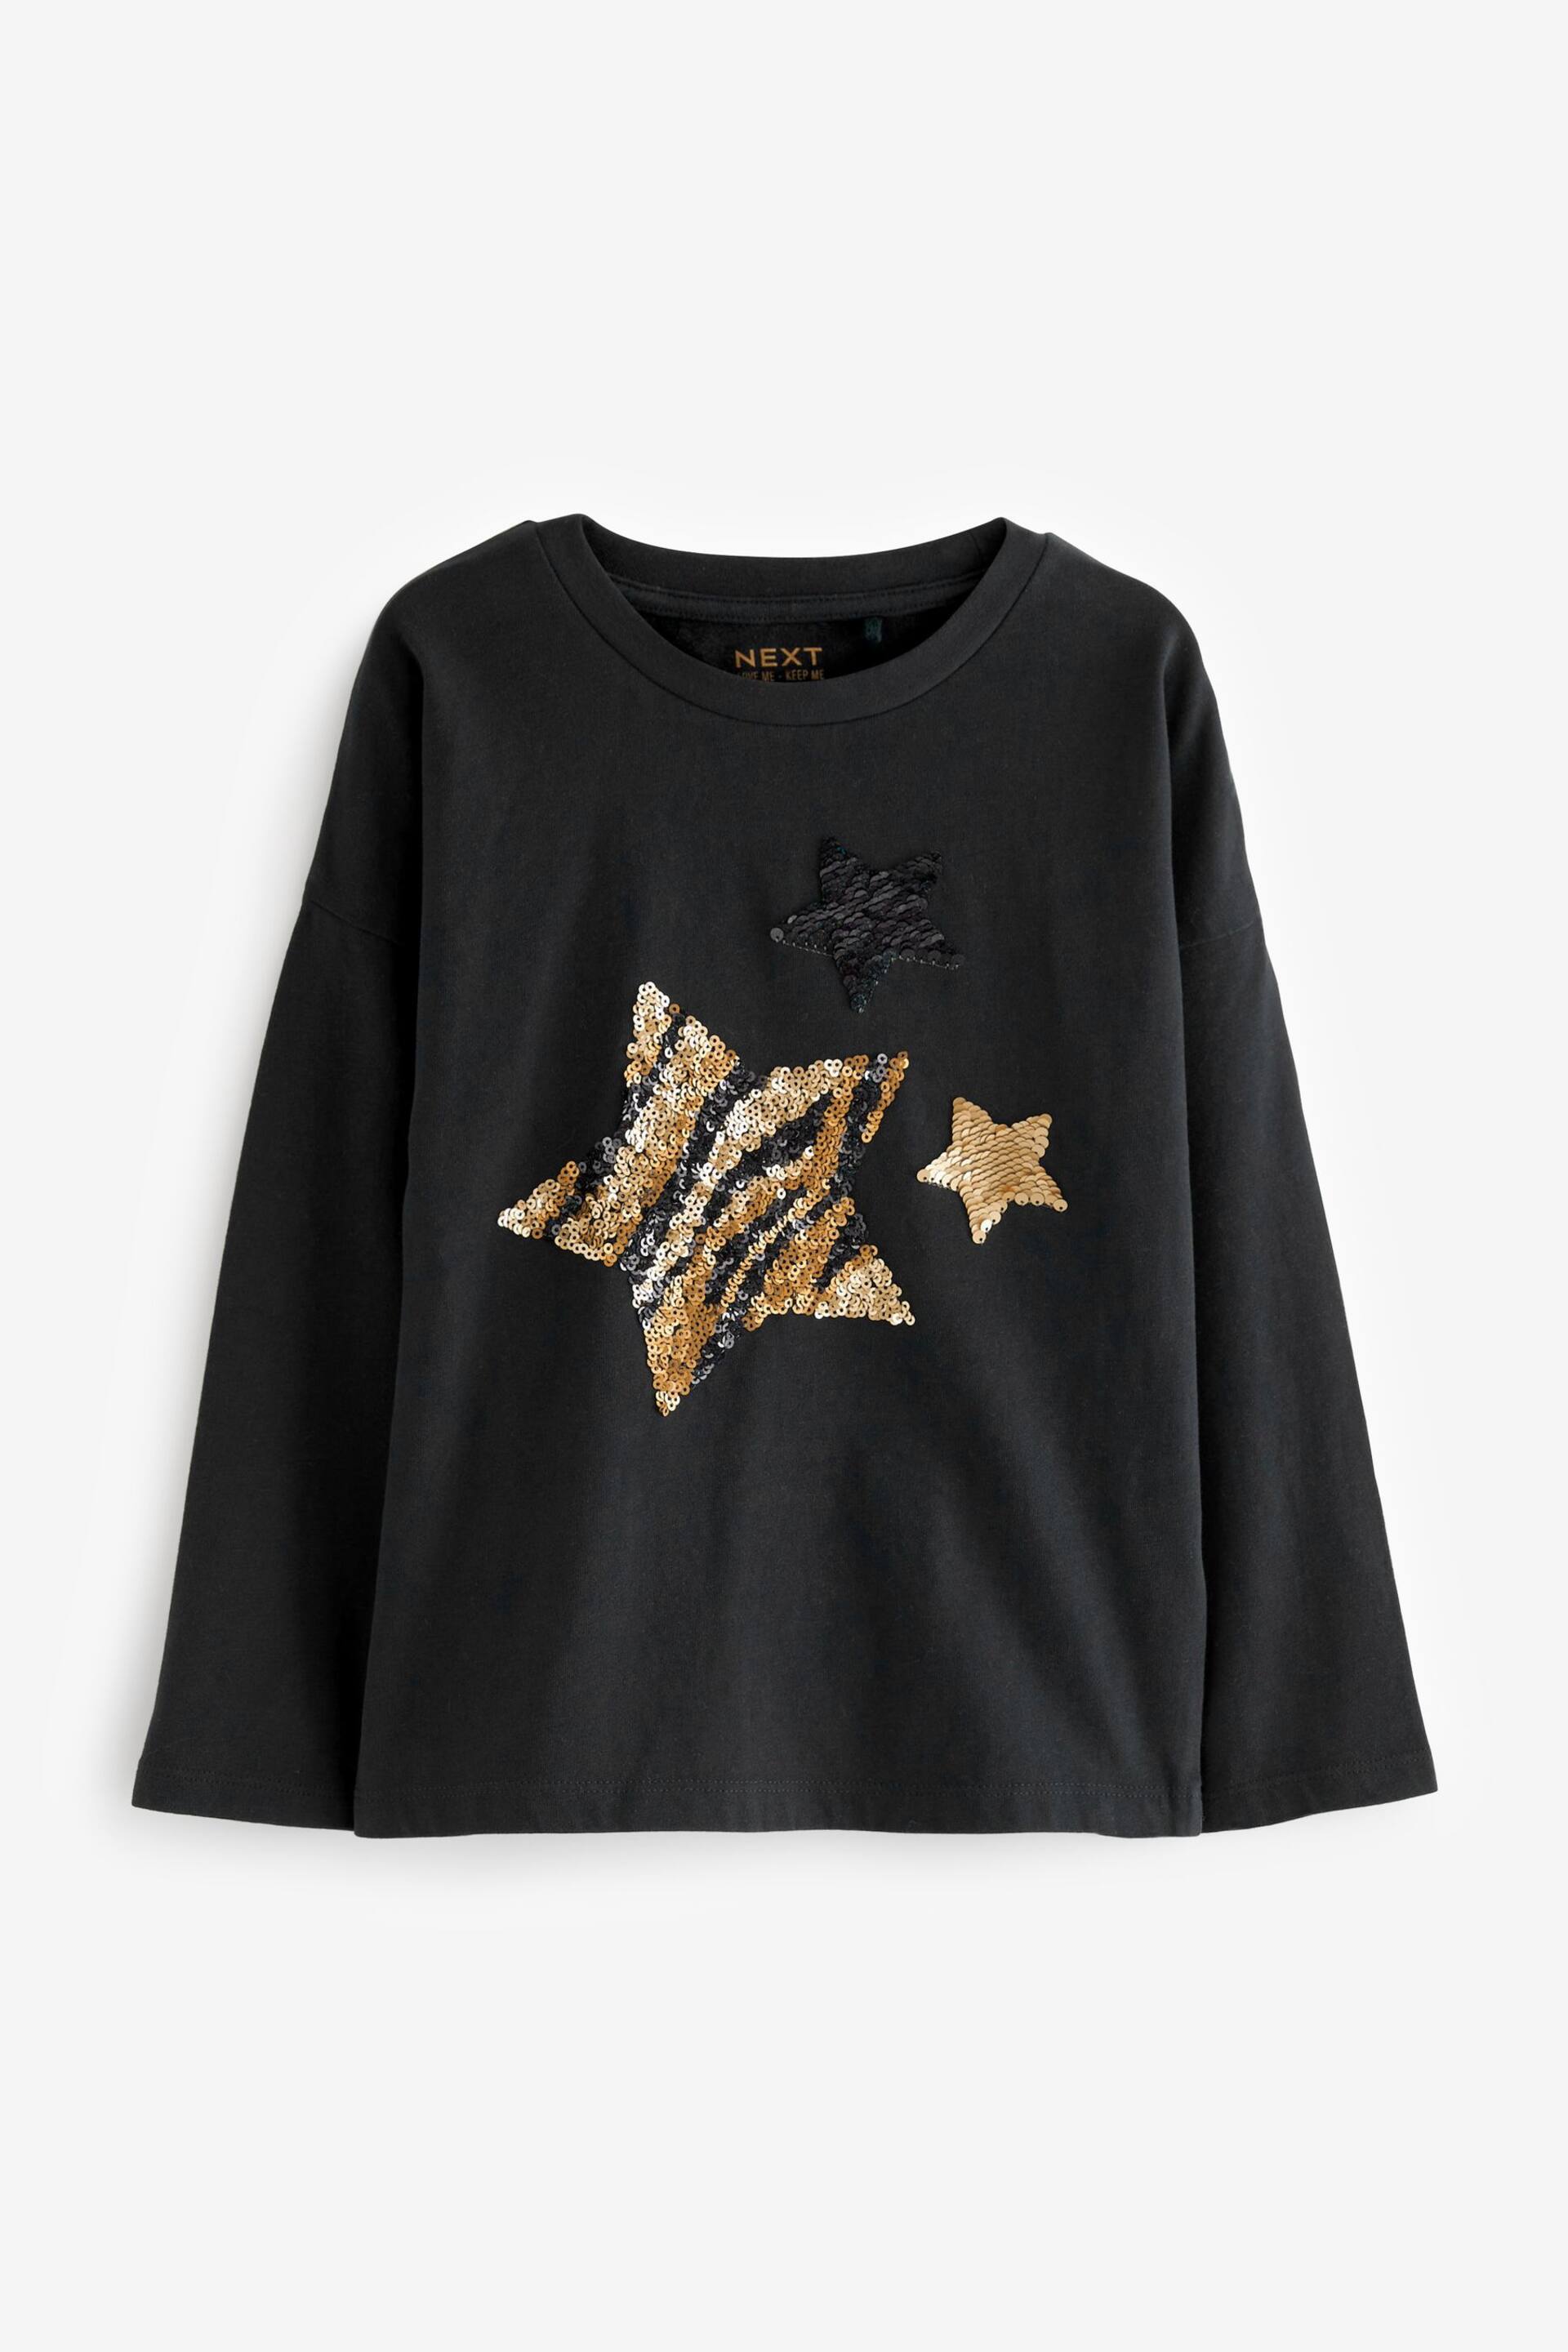 Black Sequin Star Long Sleeve T-Shirt (3-16yrs) - Image 5 of 7